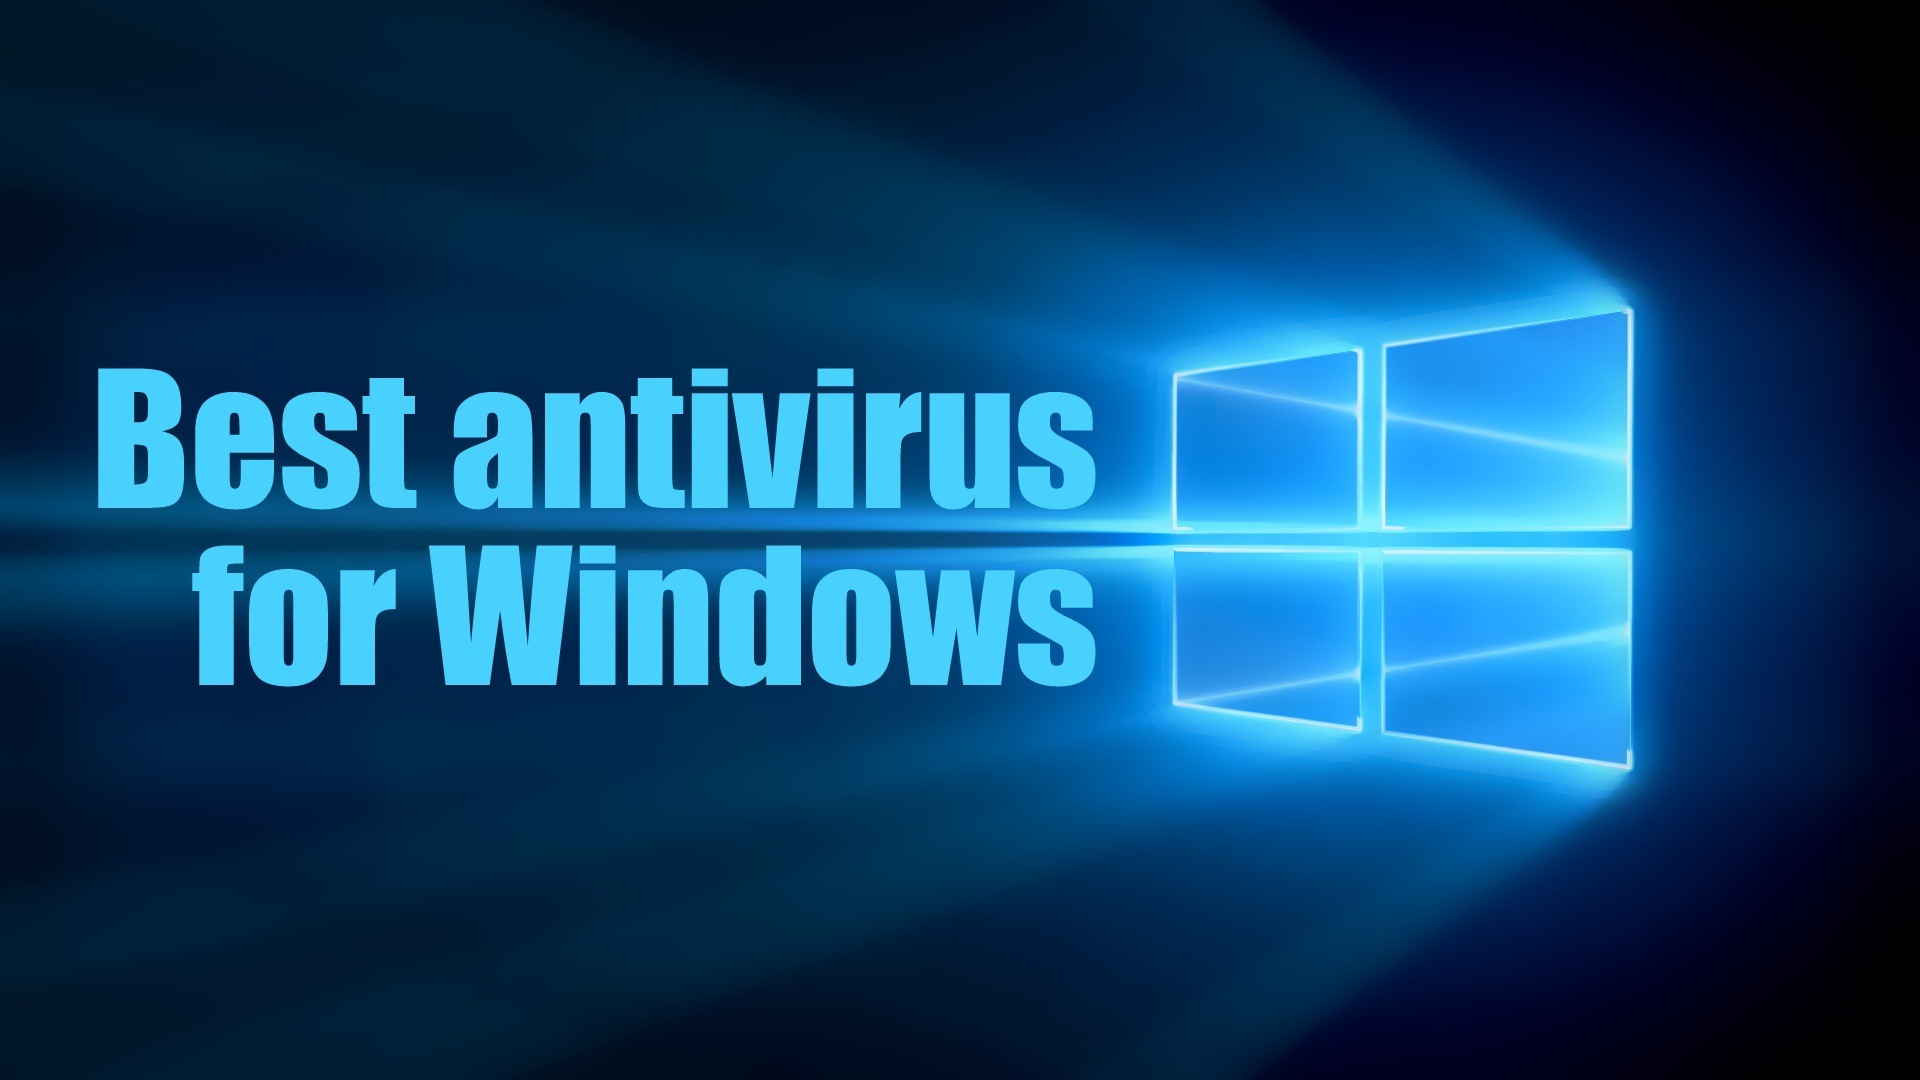 Download avast antivirus for windows 8.1 with crack